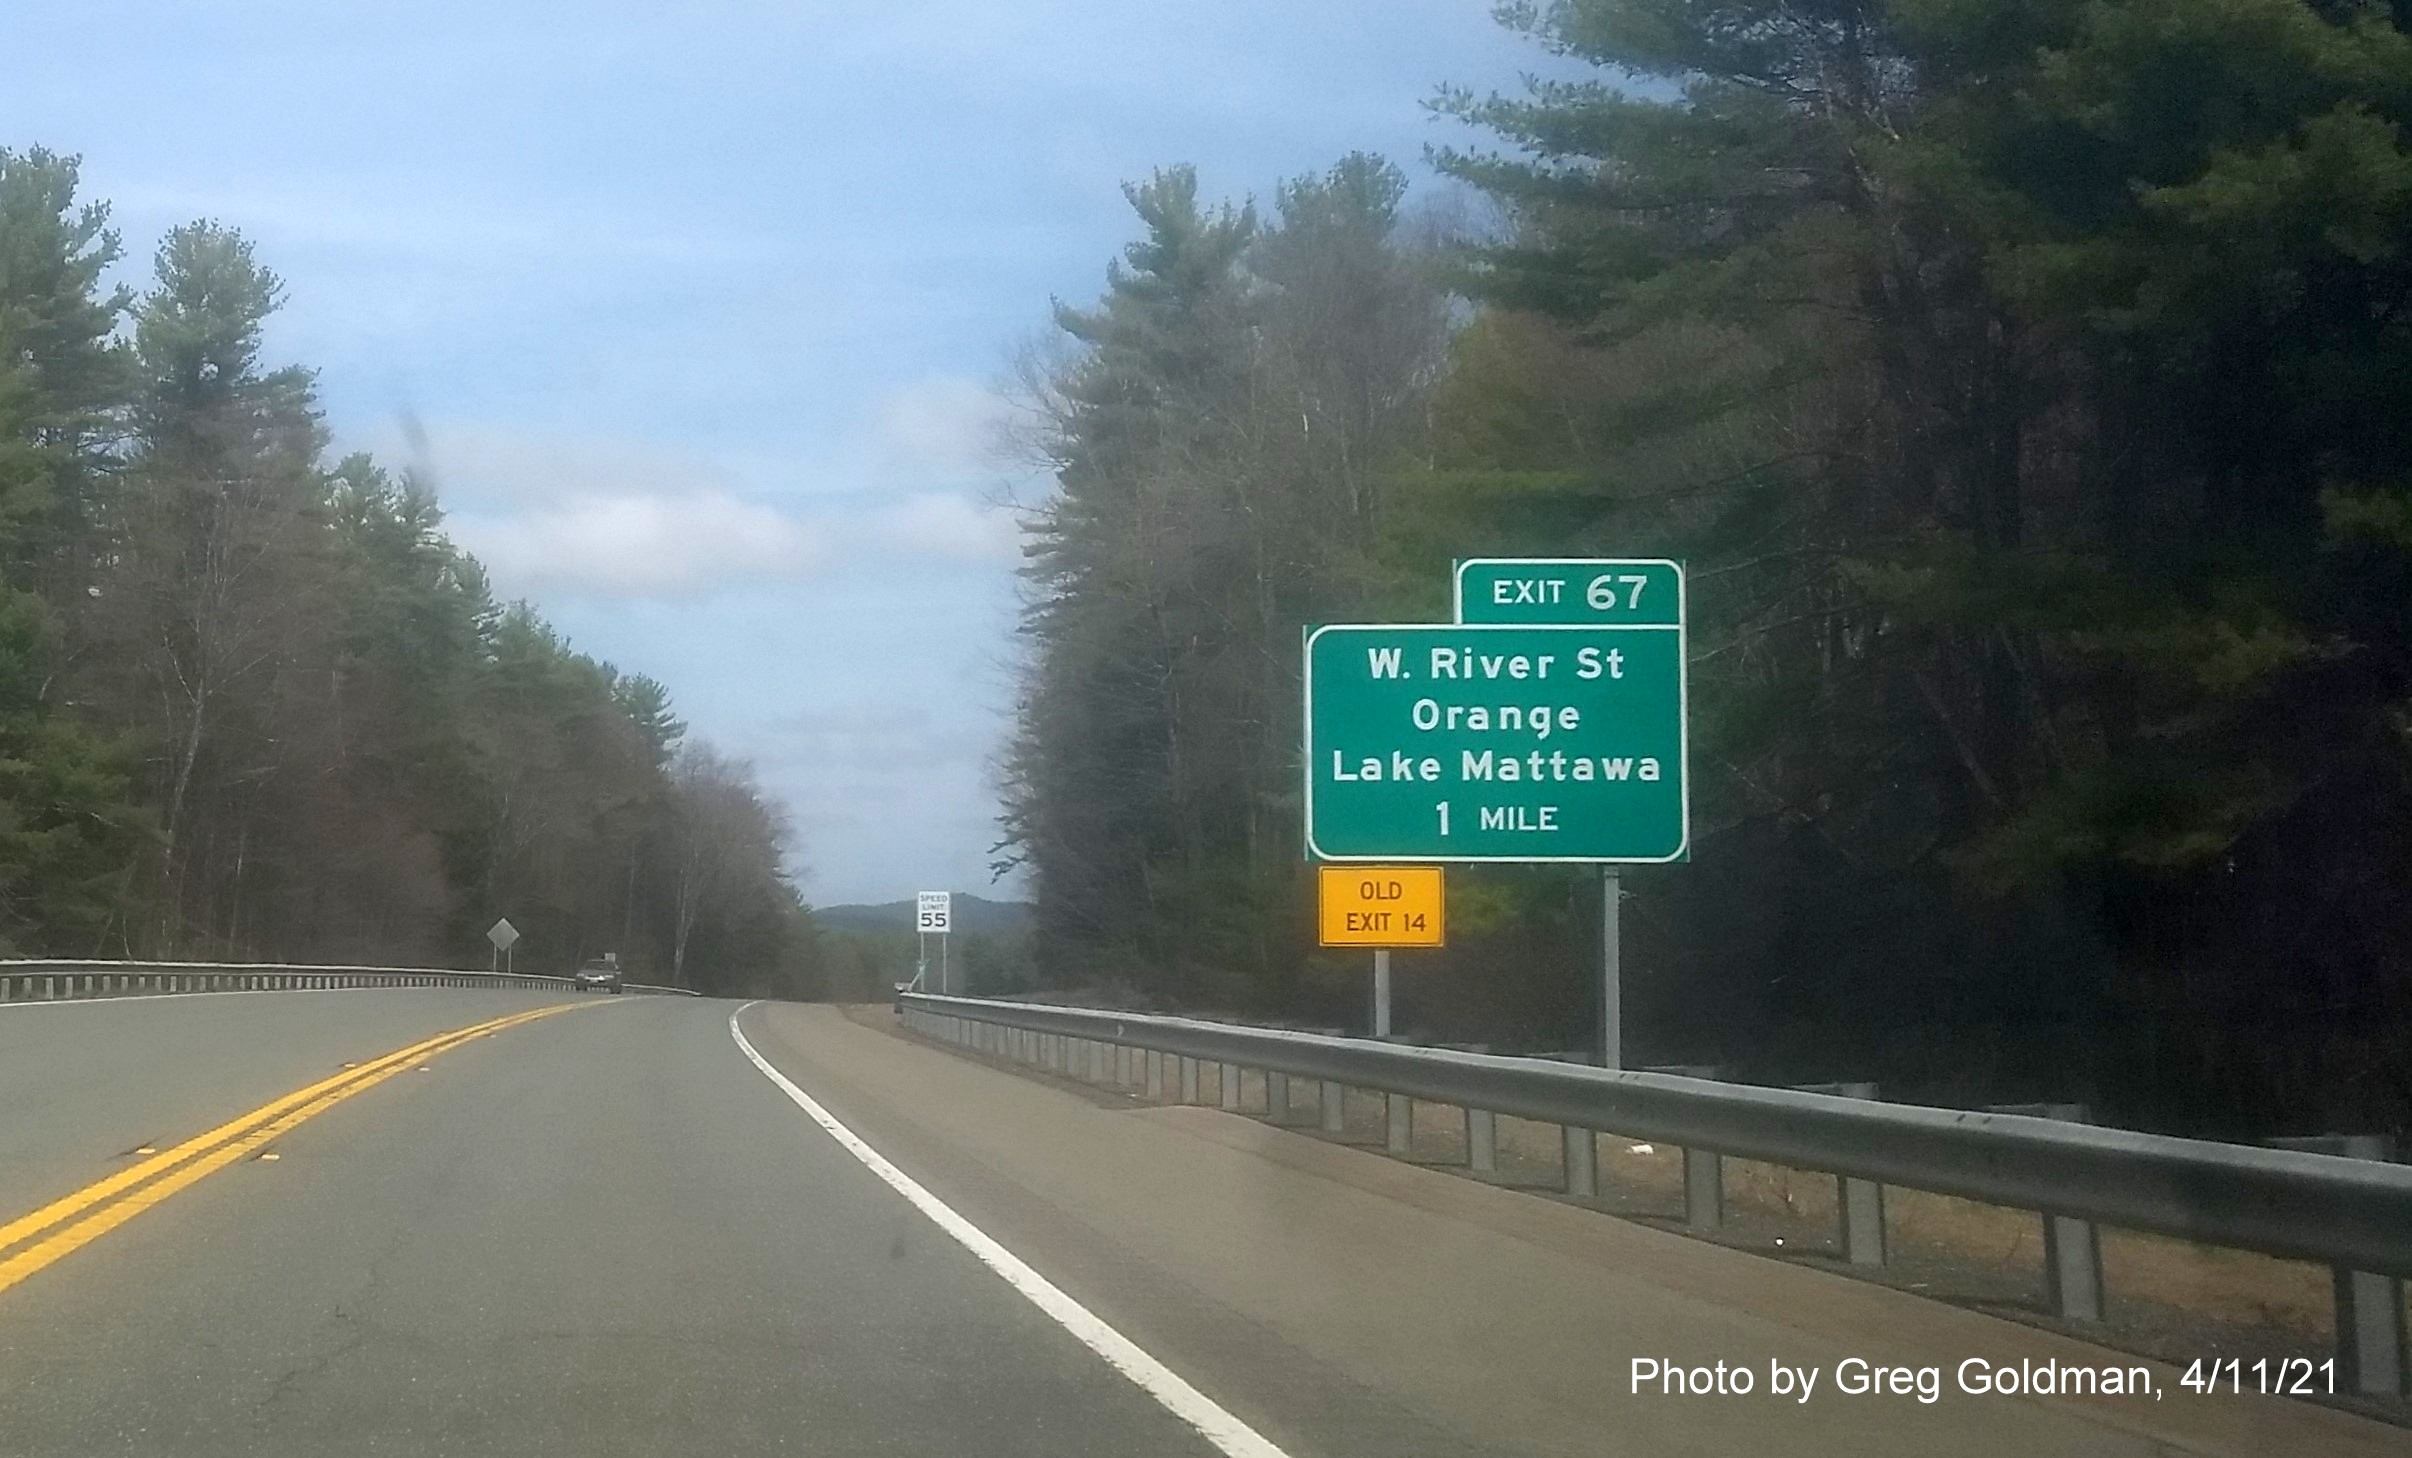 Image of 1 Mile advance sign for West River Street exit with new milepost based exit number and yellow Old Exit 14 sign on left support on MA 2 West in Orange, by Greg Goldman, April 2021